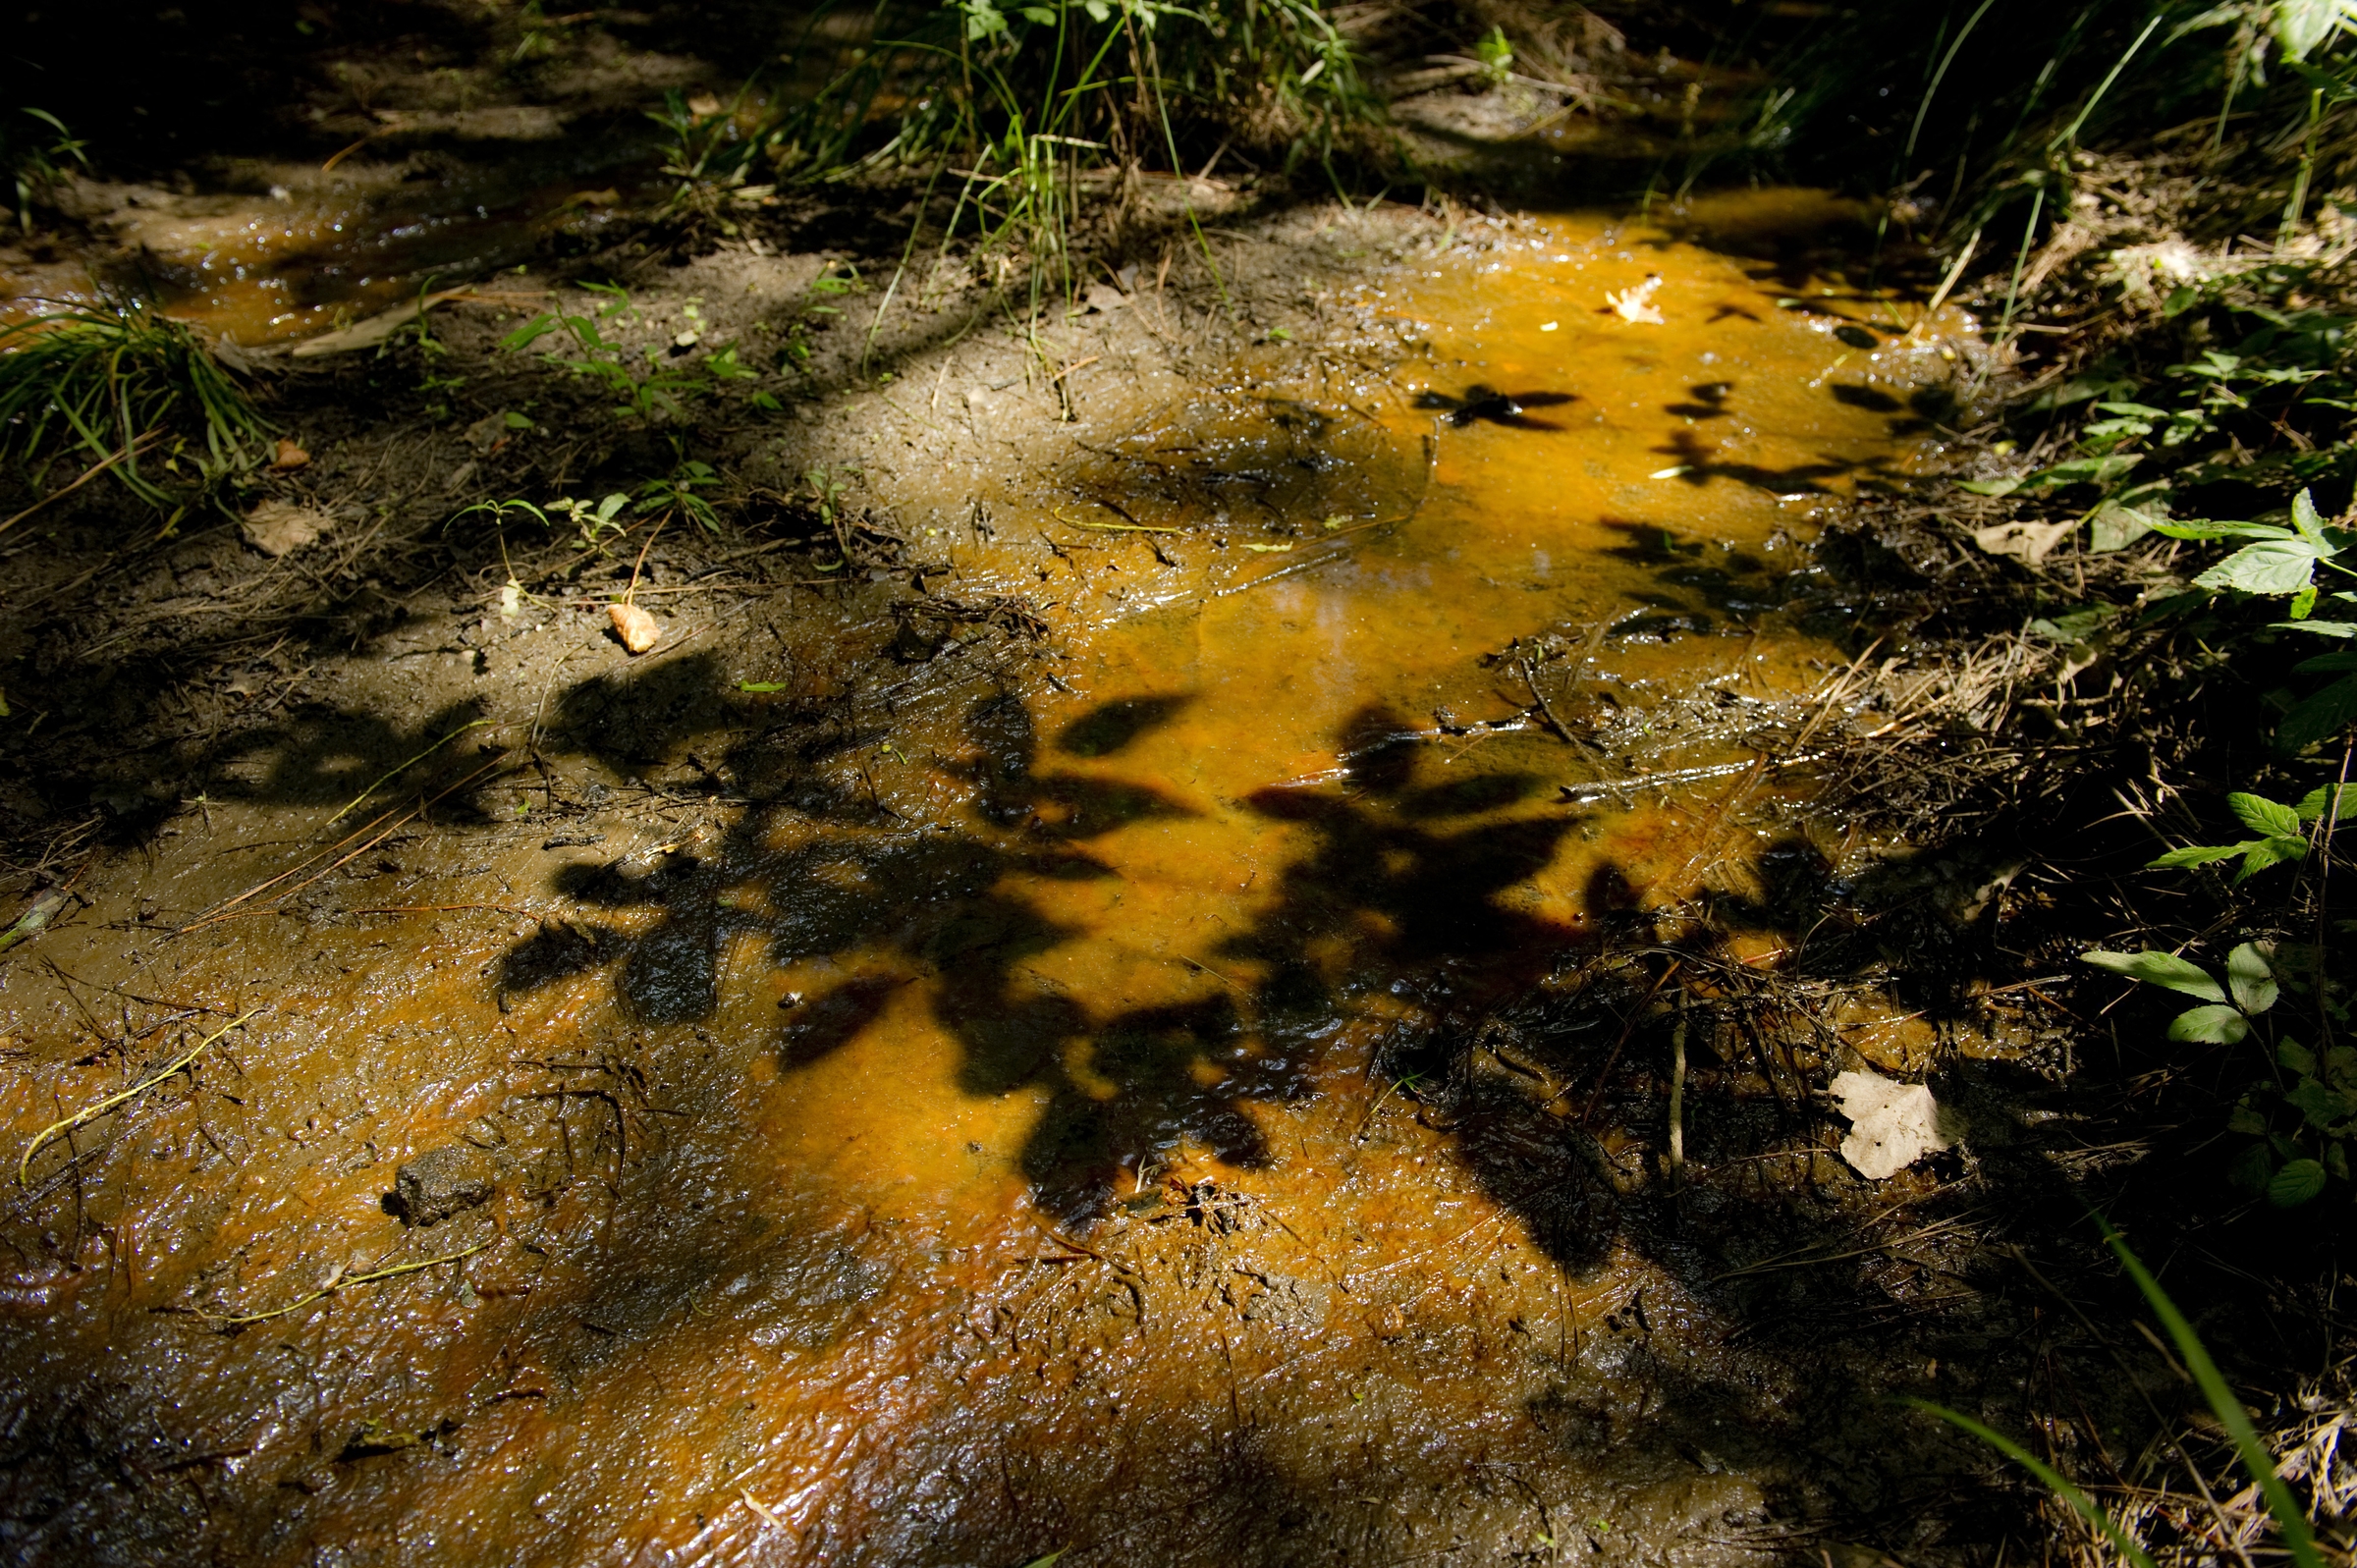 This puddle marks the birthplace of Little Sugar Creek. Photo: Nancy Pierce